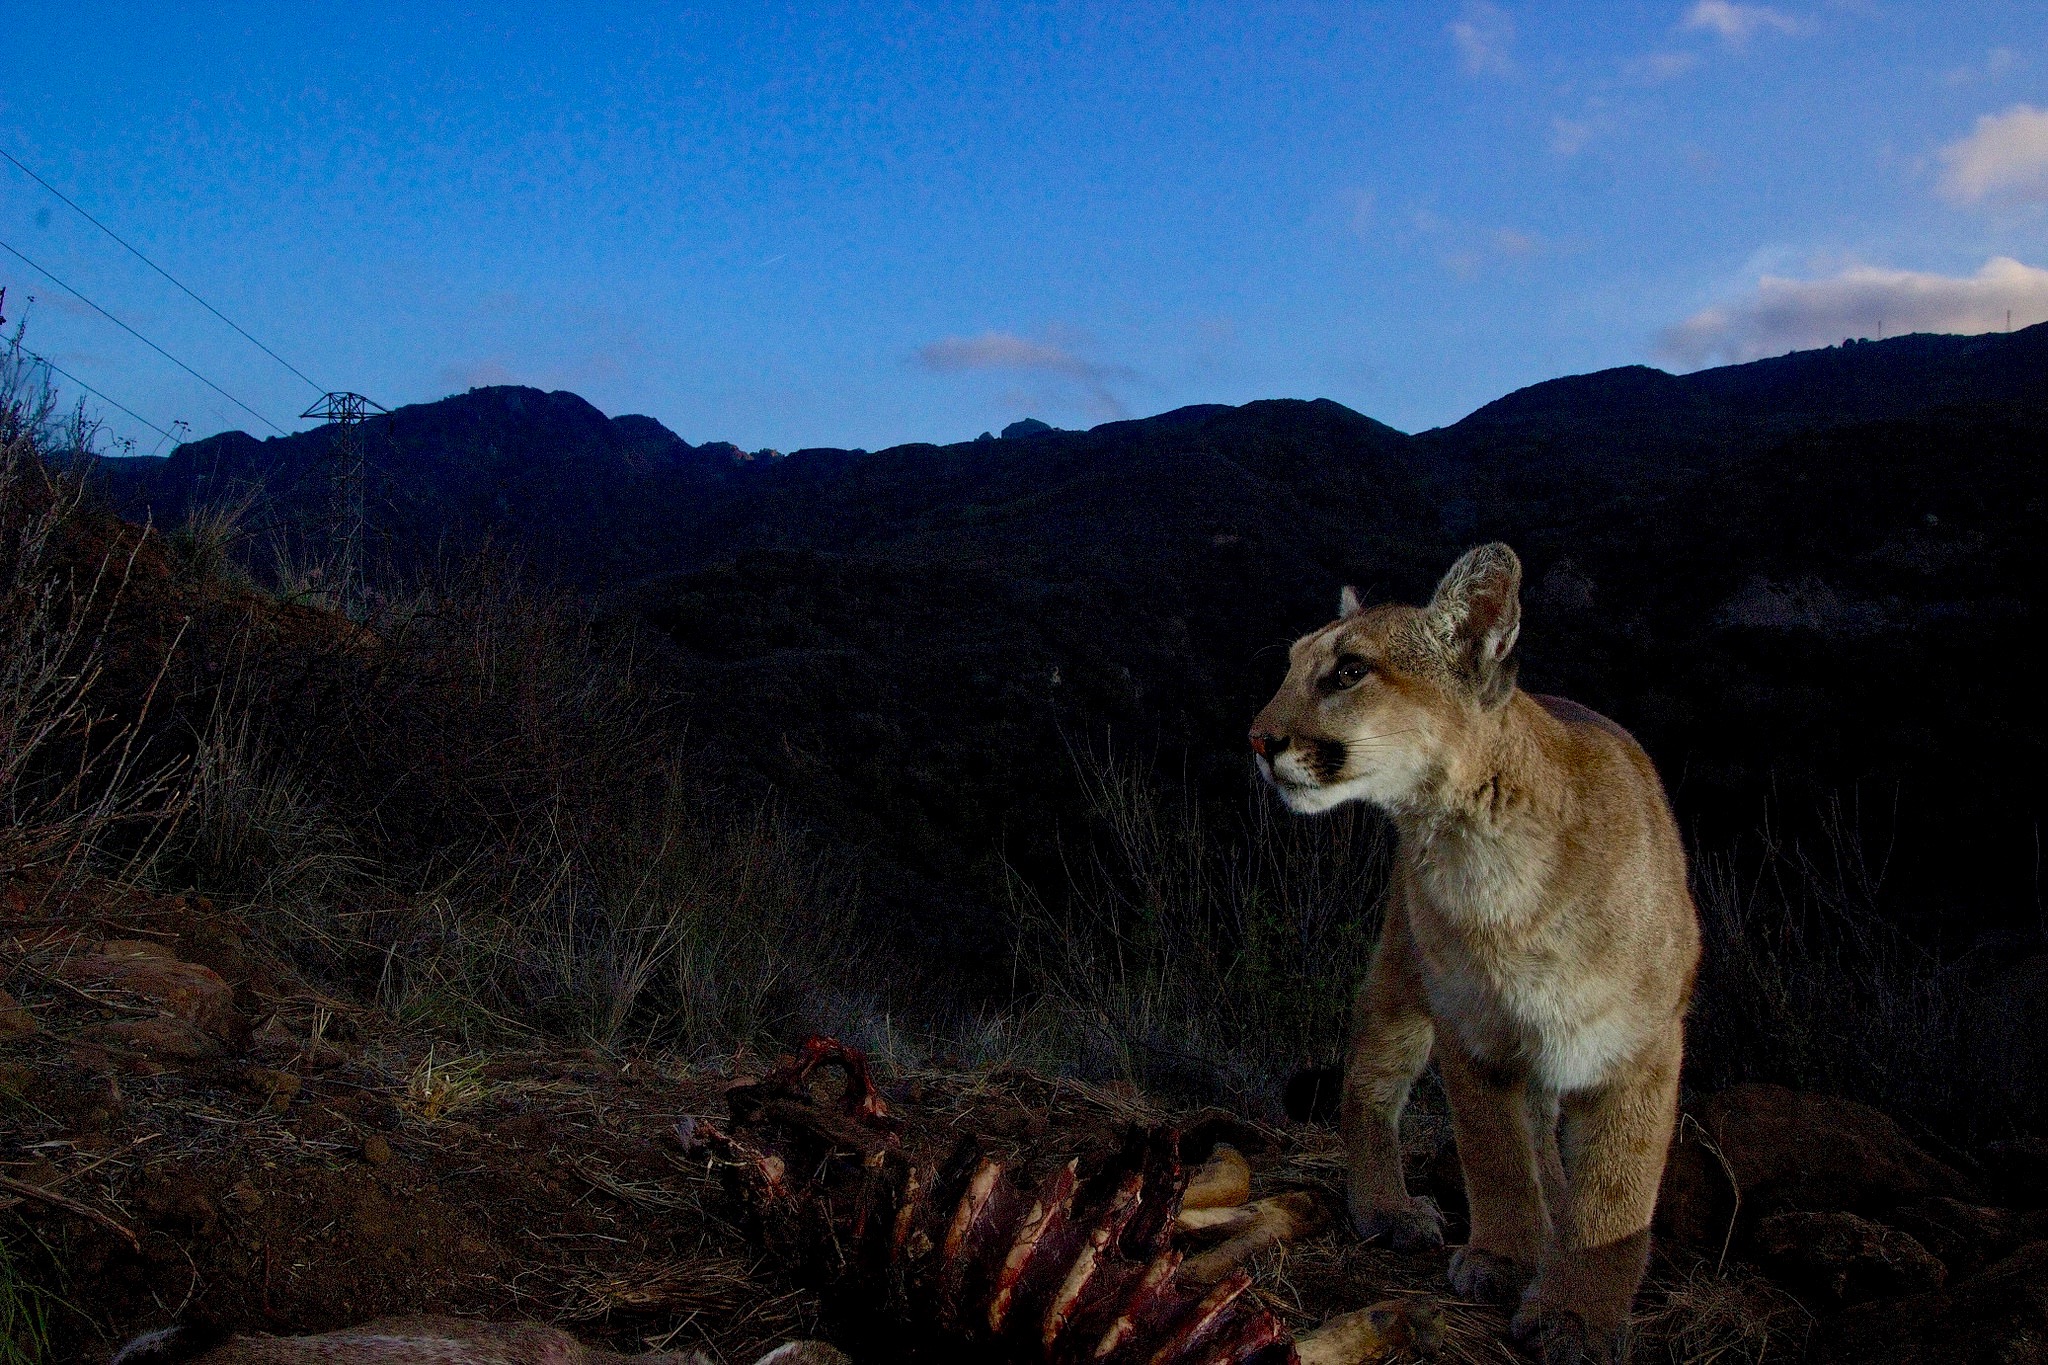 Southern California’s mountain lions might soon go extinct